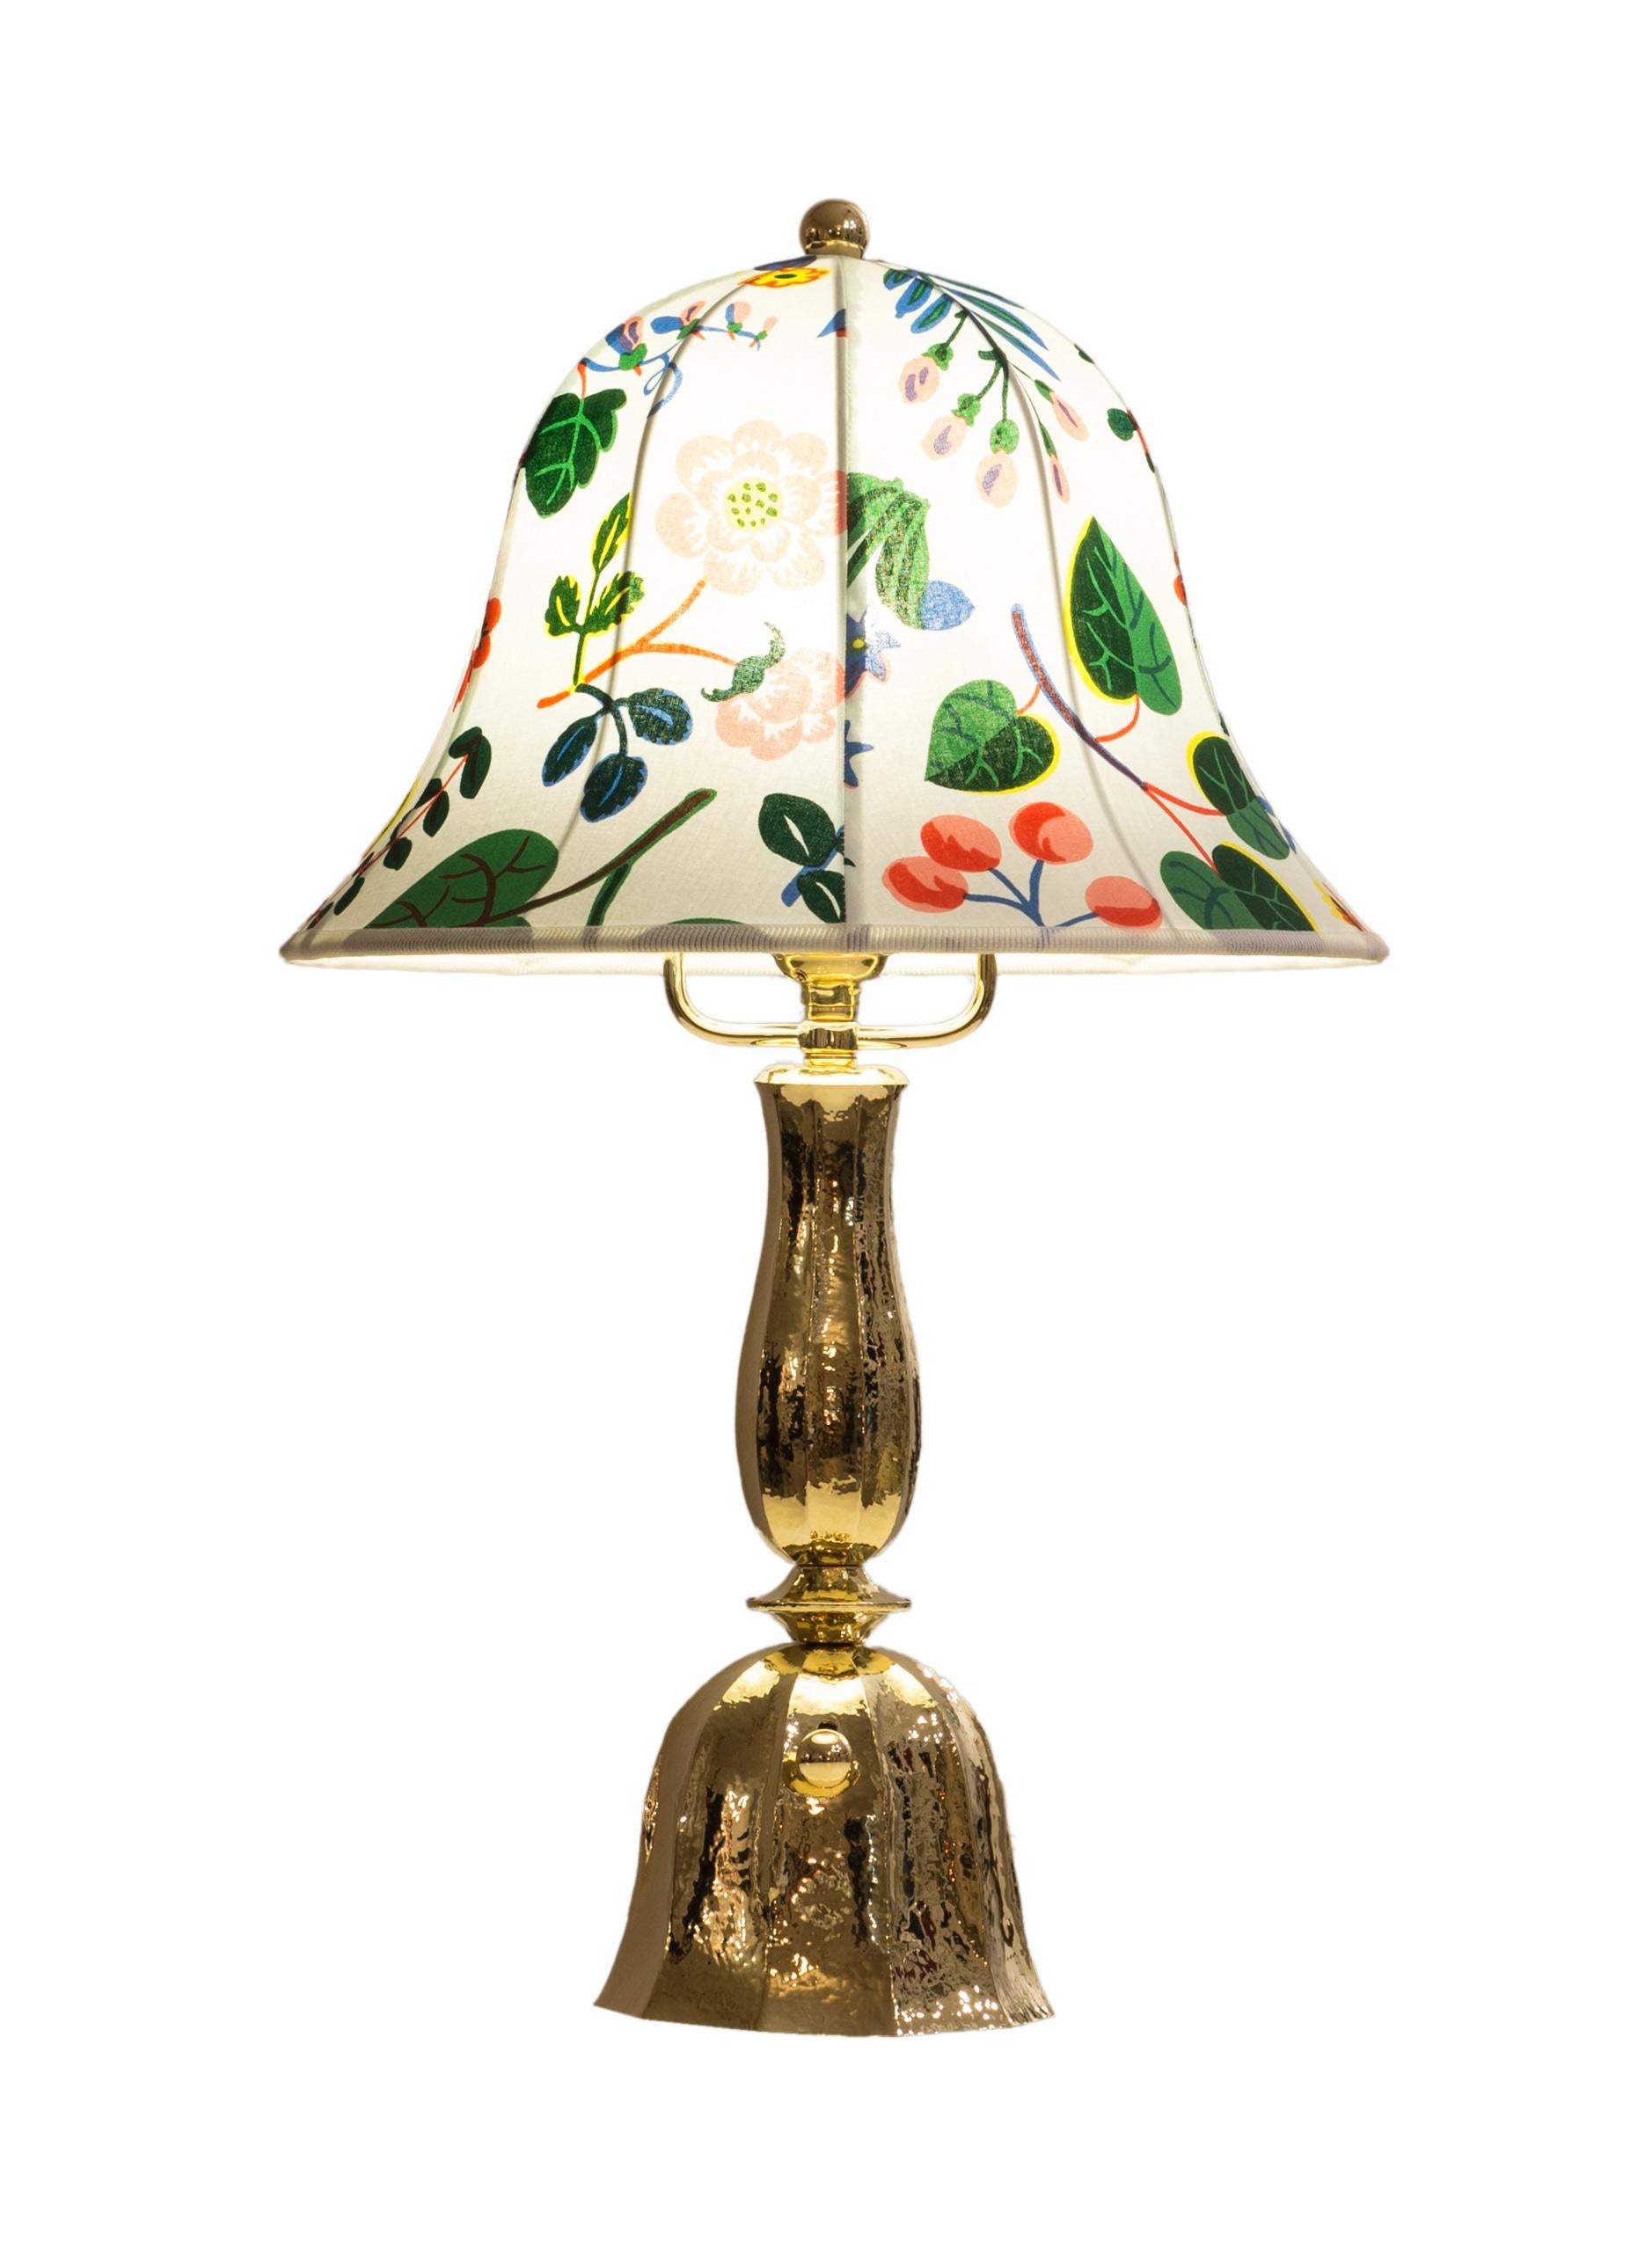 An extremely elaborate table lamp in the famous Hoffmann design from the 1920s. chased/hammered brass, the hand-sewn fabric-shades with colorful designs by Josef Frank, WW-Modell Nr 3039 - M Ia 2

Most  components according to the UL regulations,